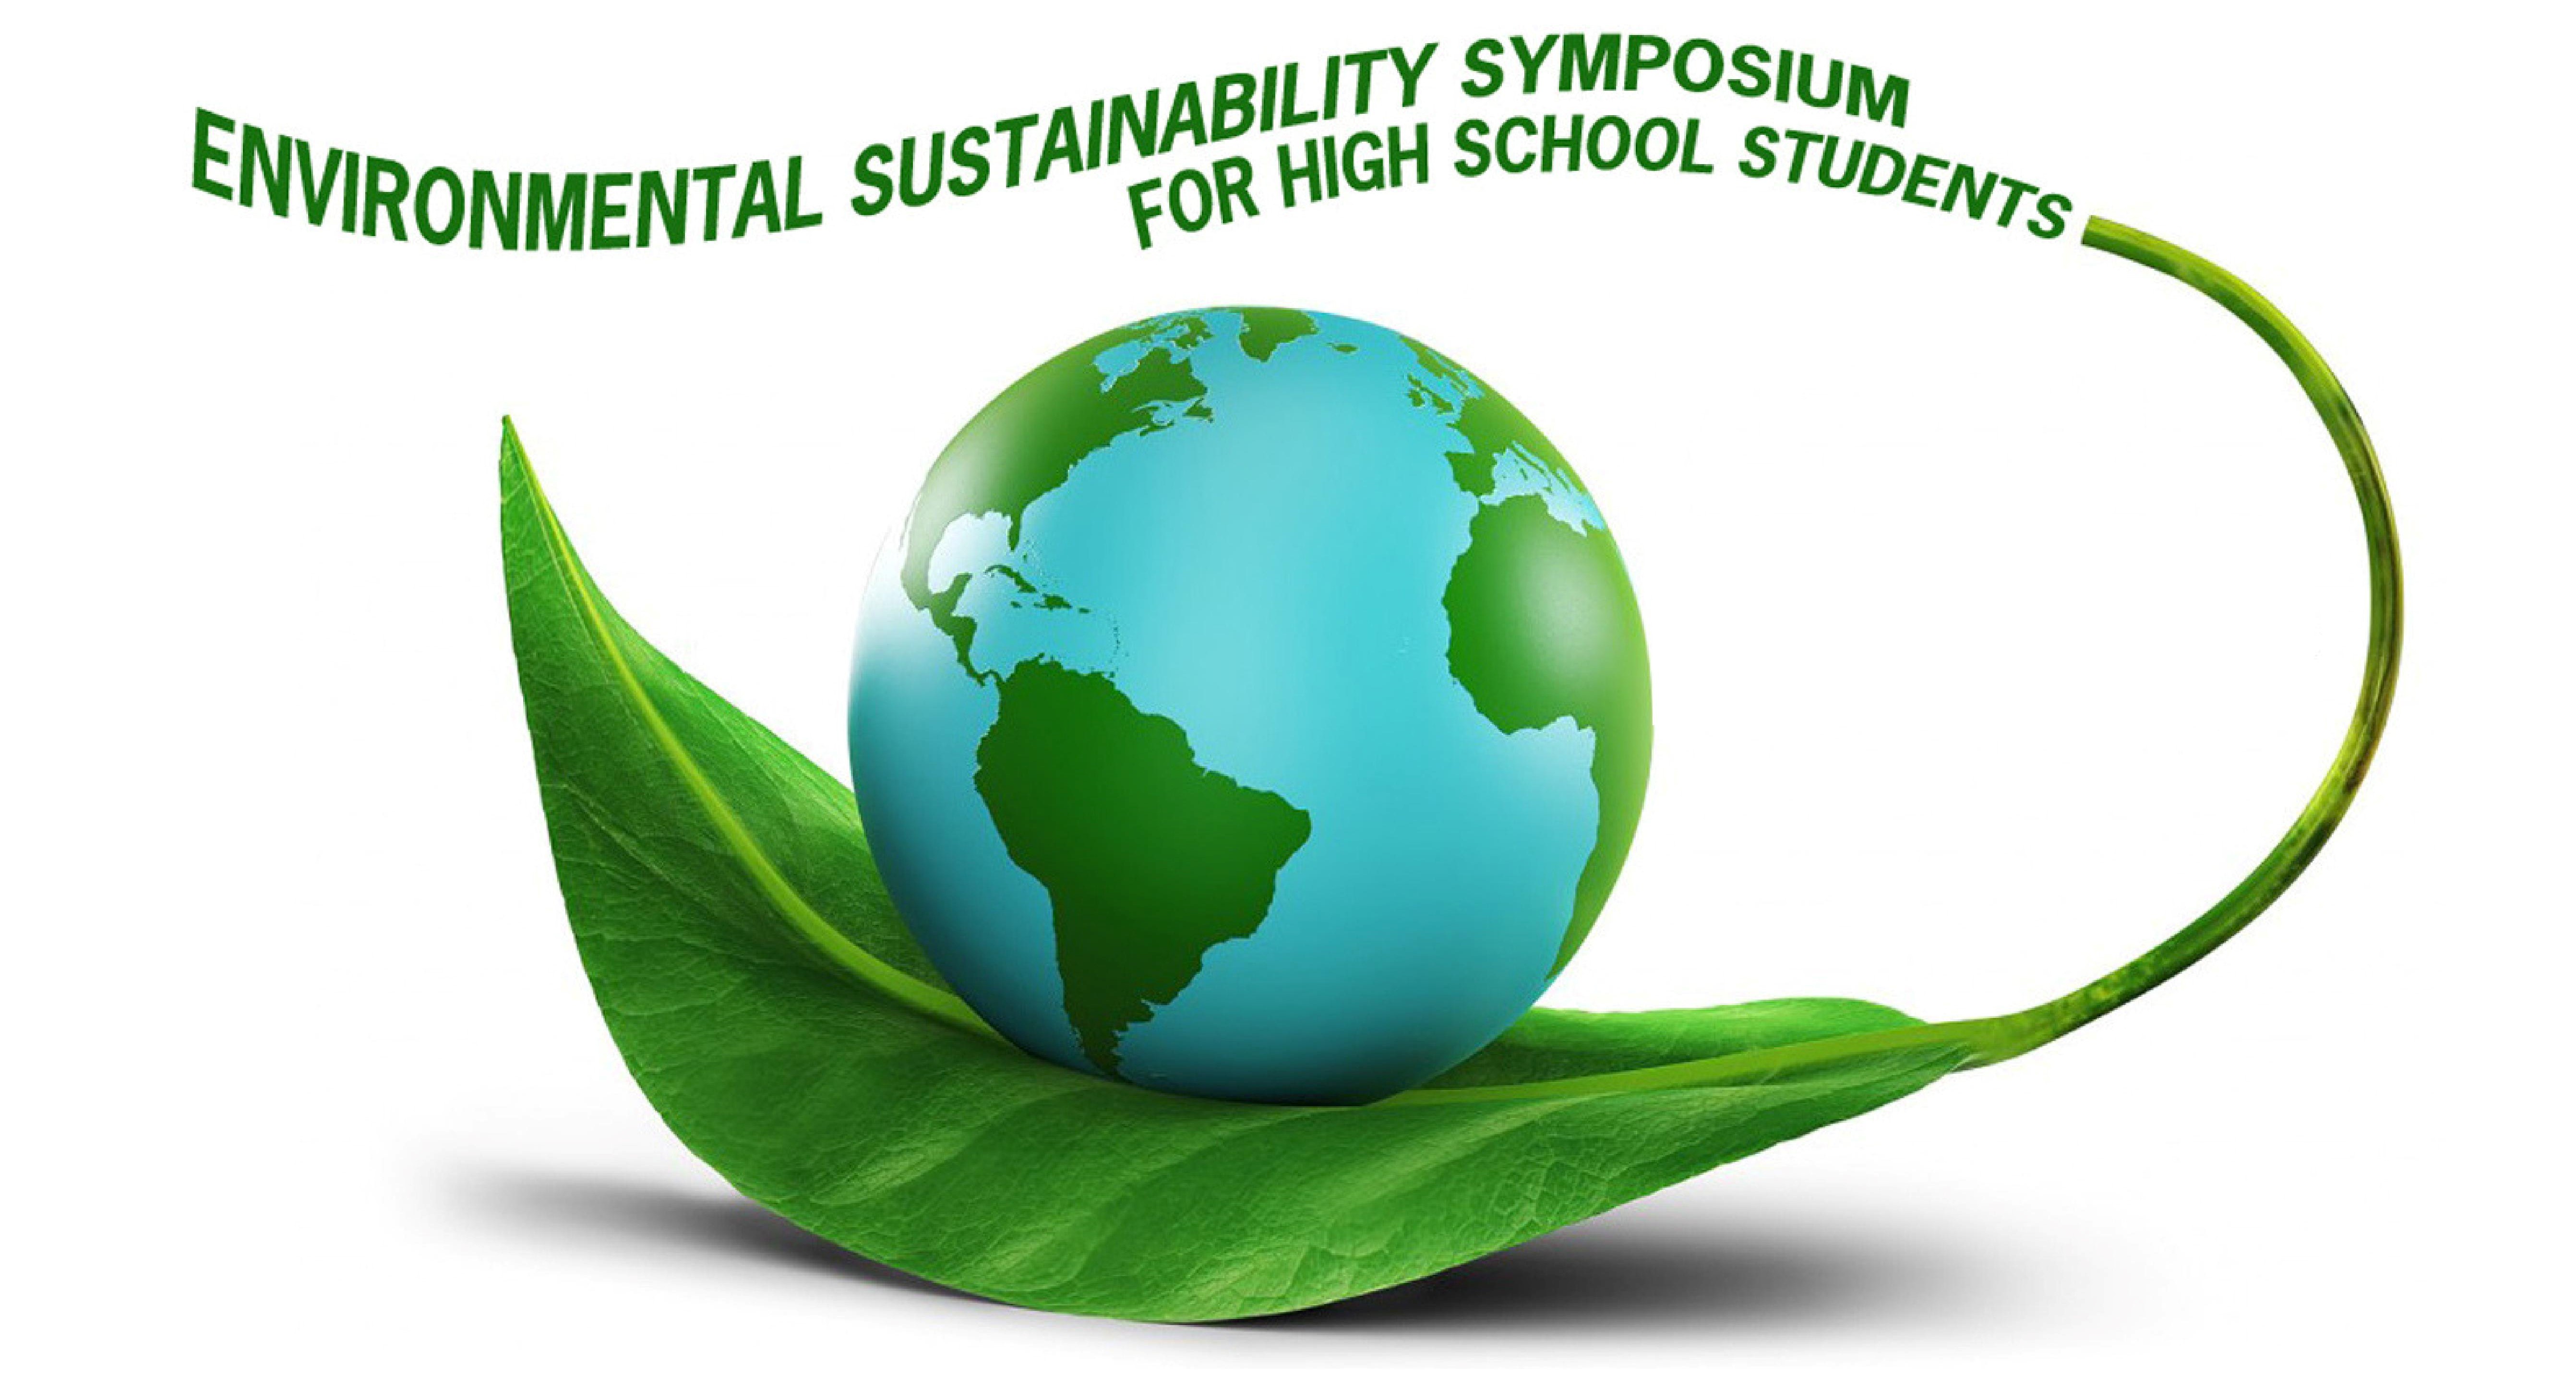 Environmental Sustainability Symposium for High School Students